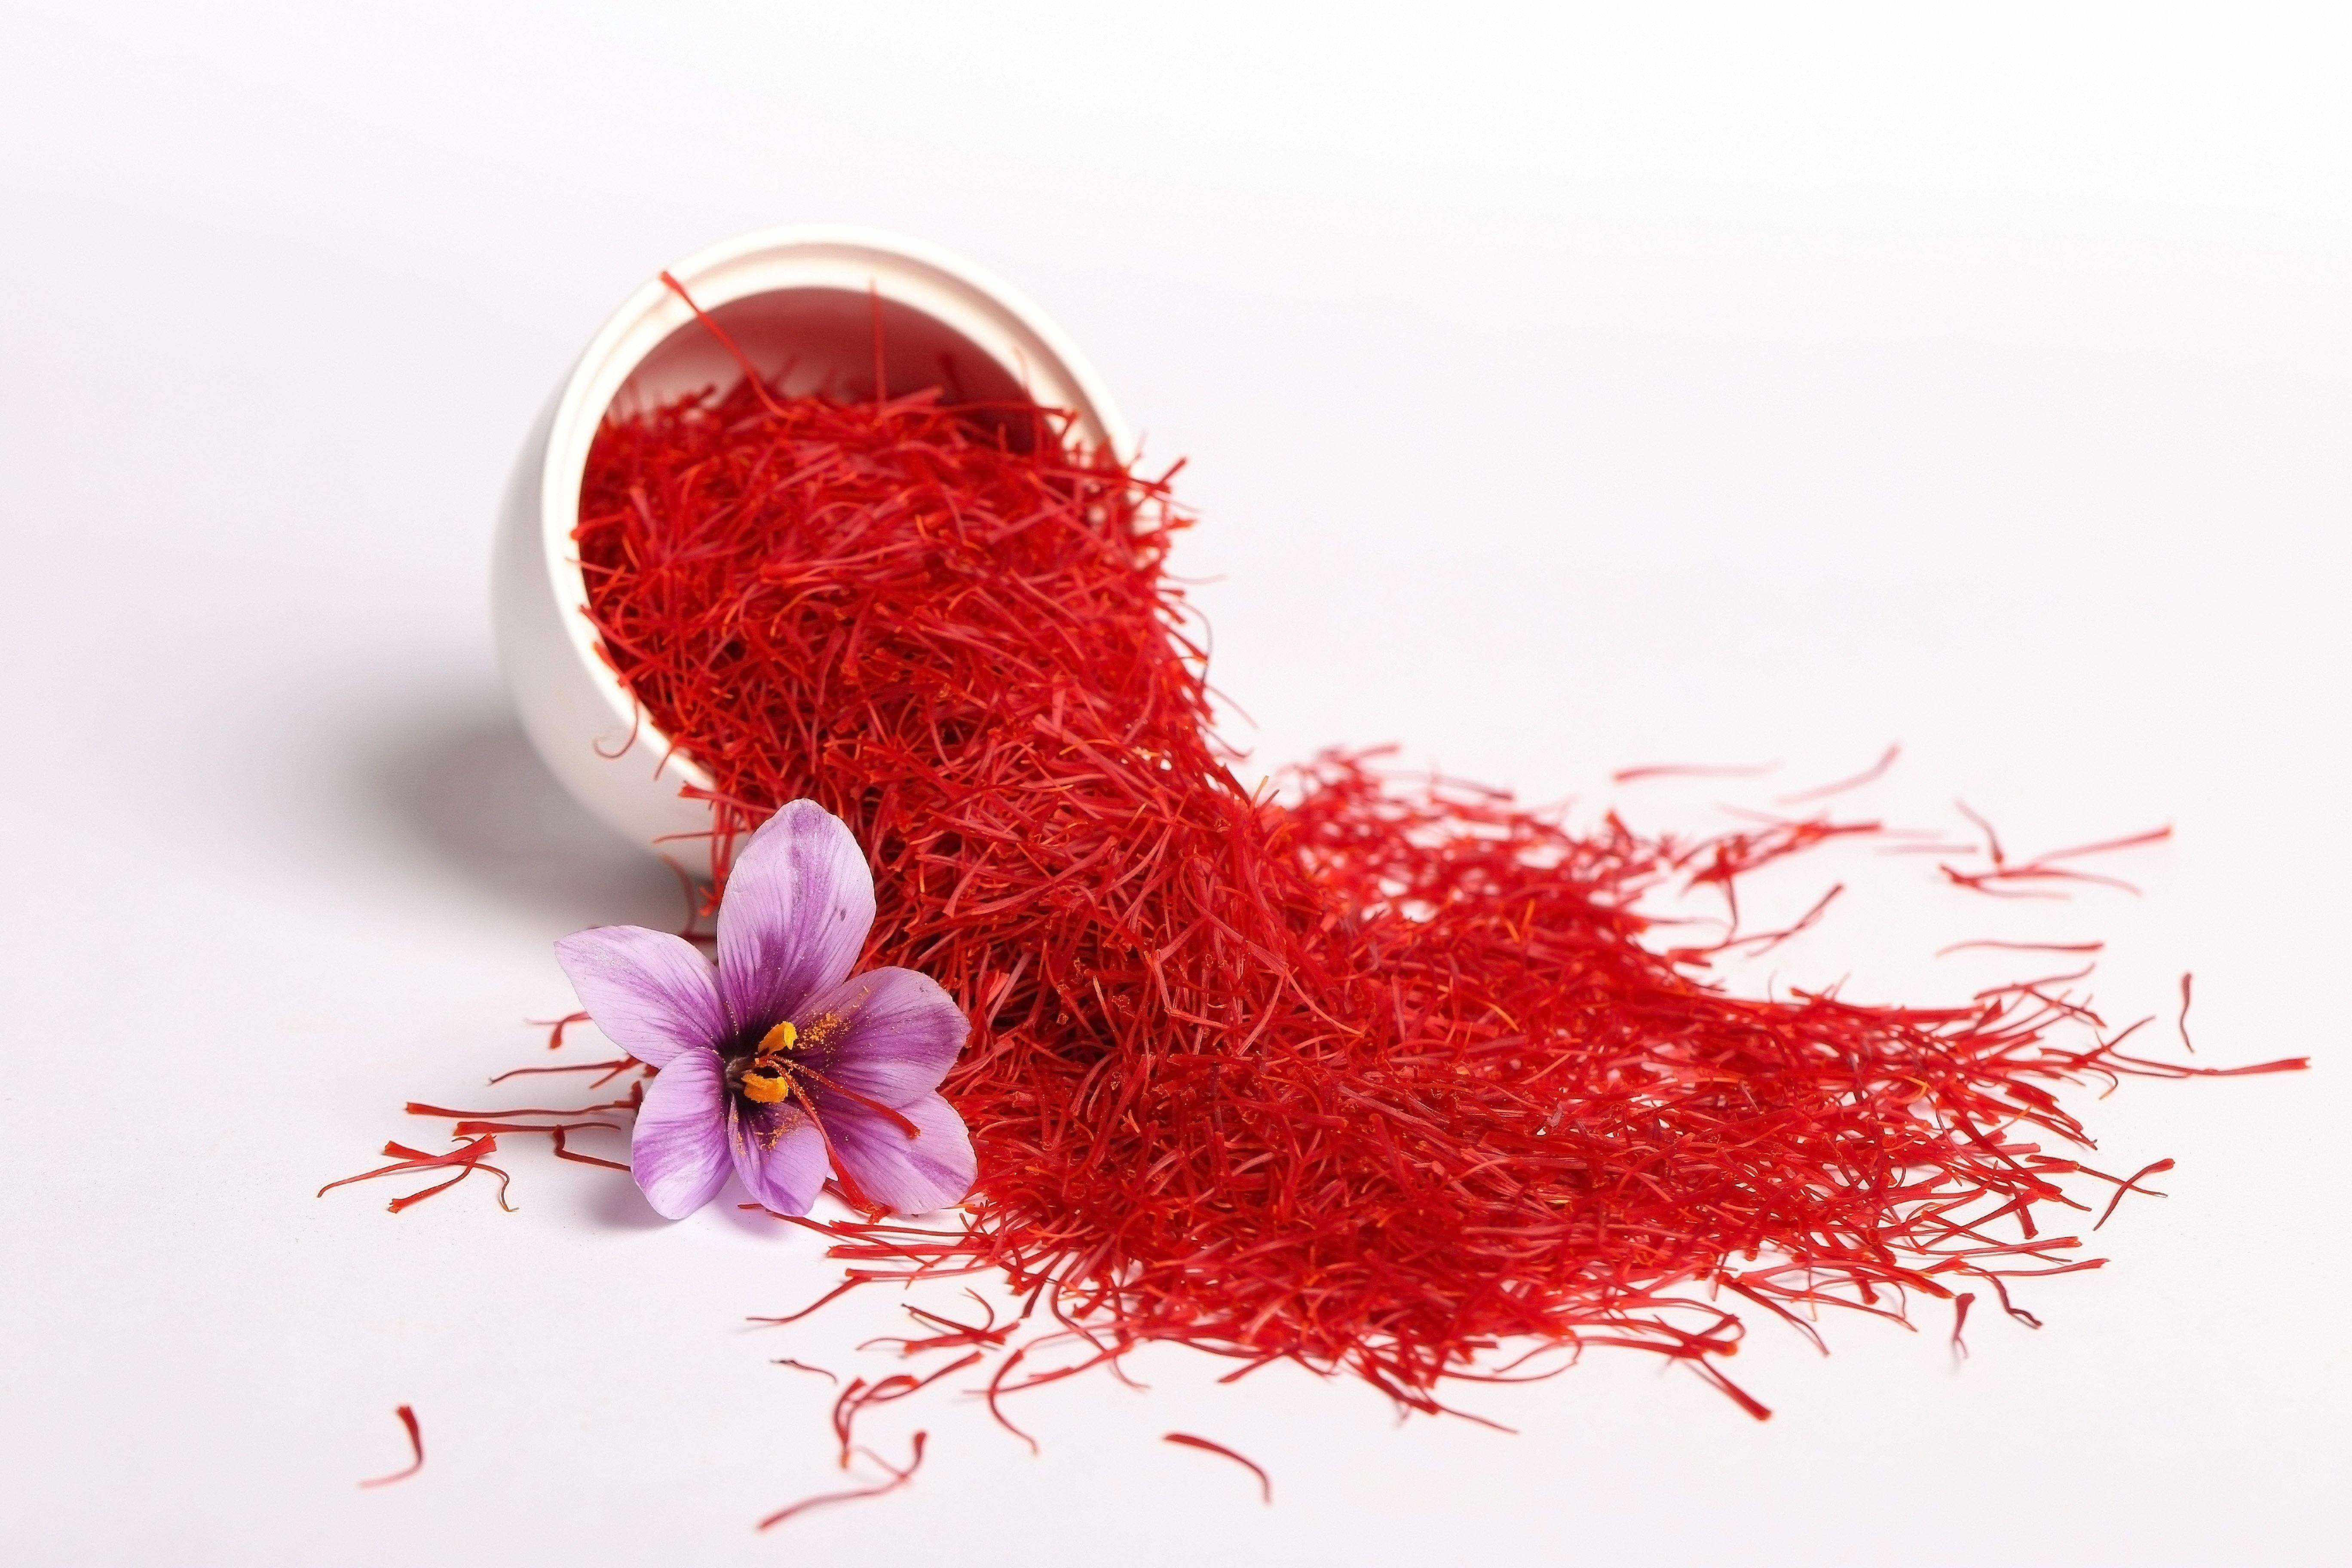 saffron spilling out of white bowl with flower